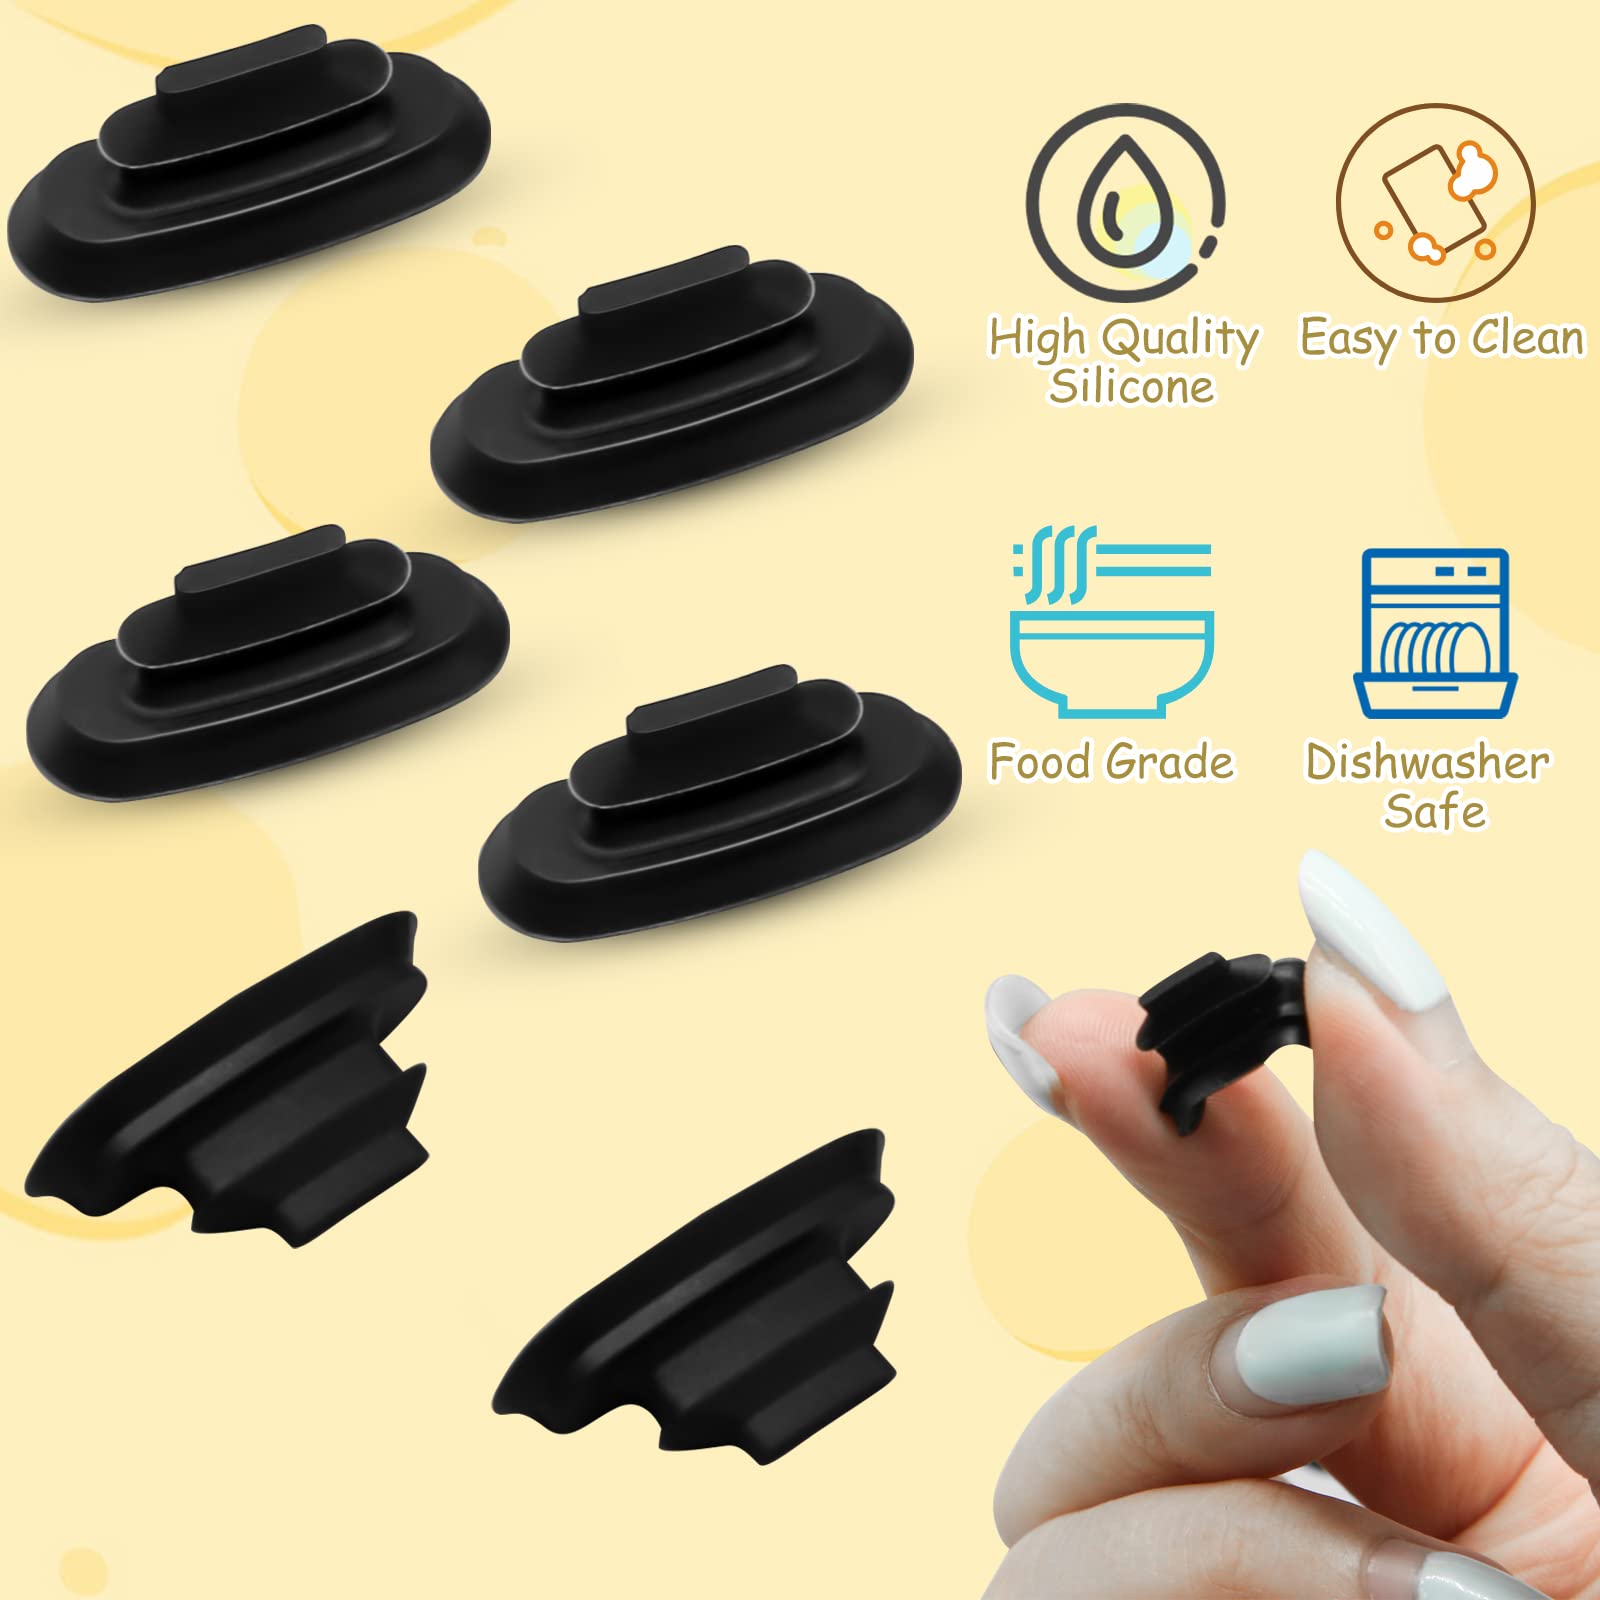 6Pcs Rubber Lid Stopper Compatible with Contigo West Loop Autoseal Travel Coffee Cup, Replacement Stopper Seal Part for Contigo West Loop Coffee Mug, Replacement Parts for Contigo Water Bottle(Black)